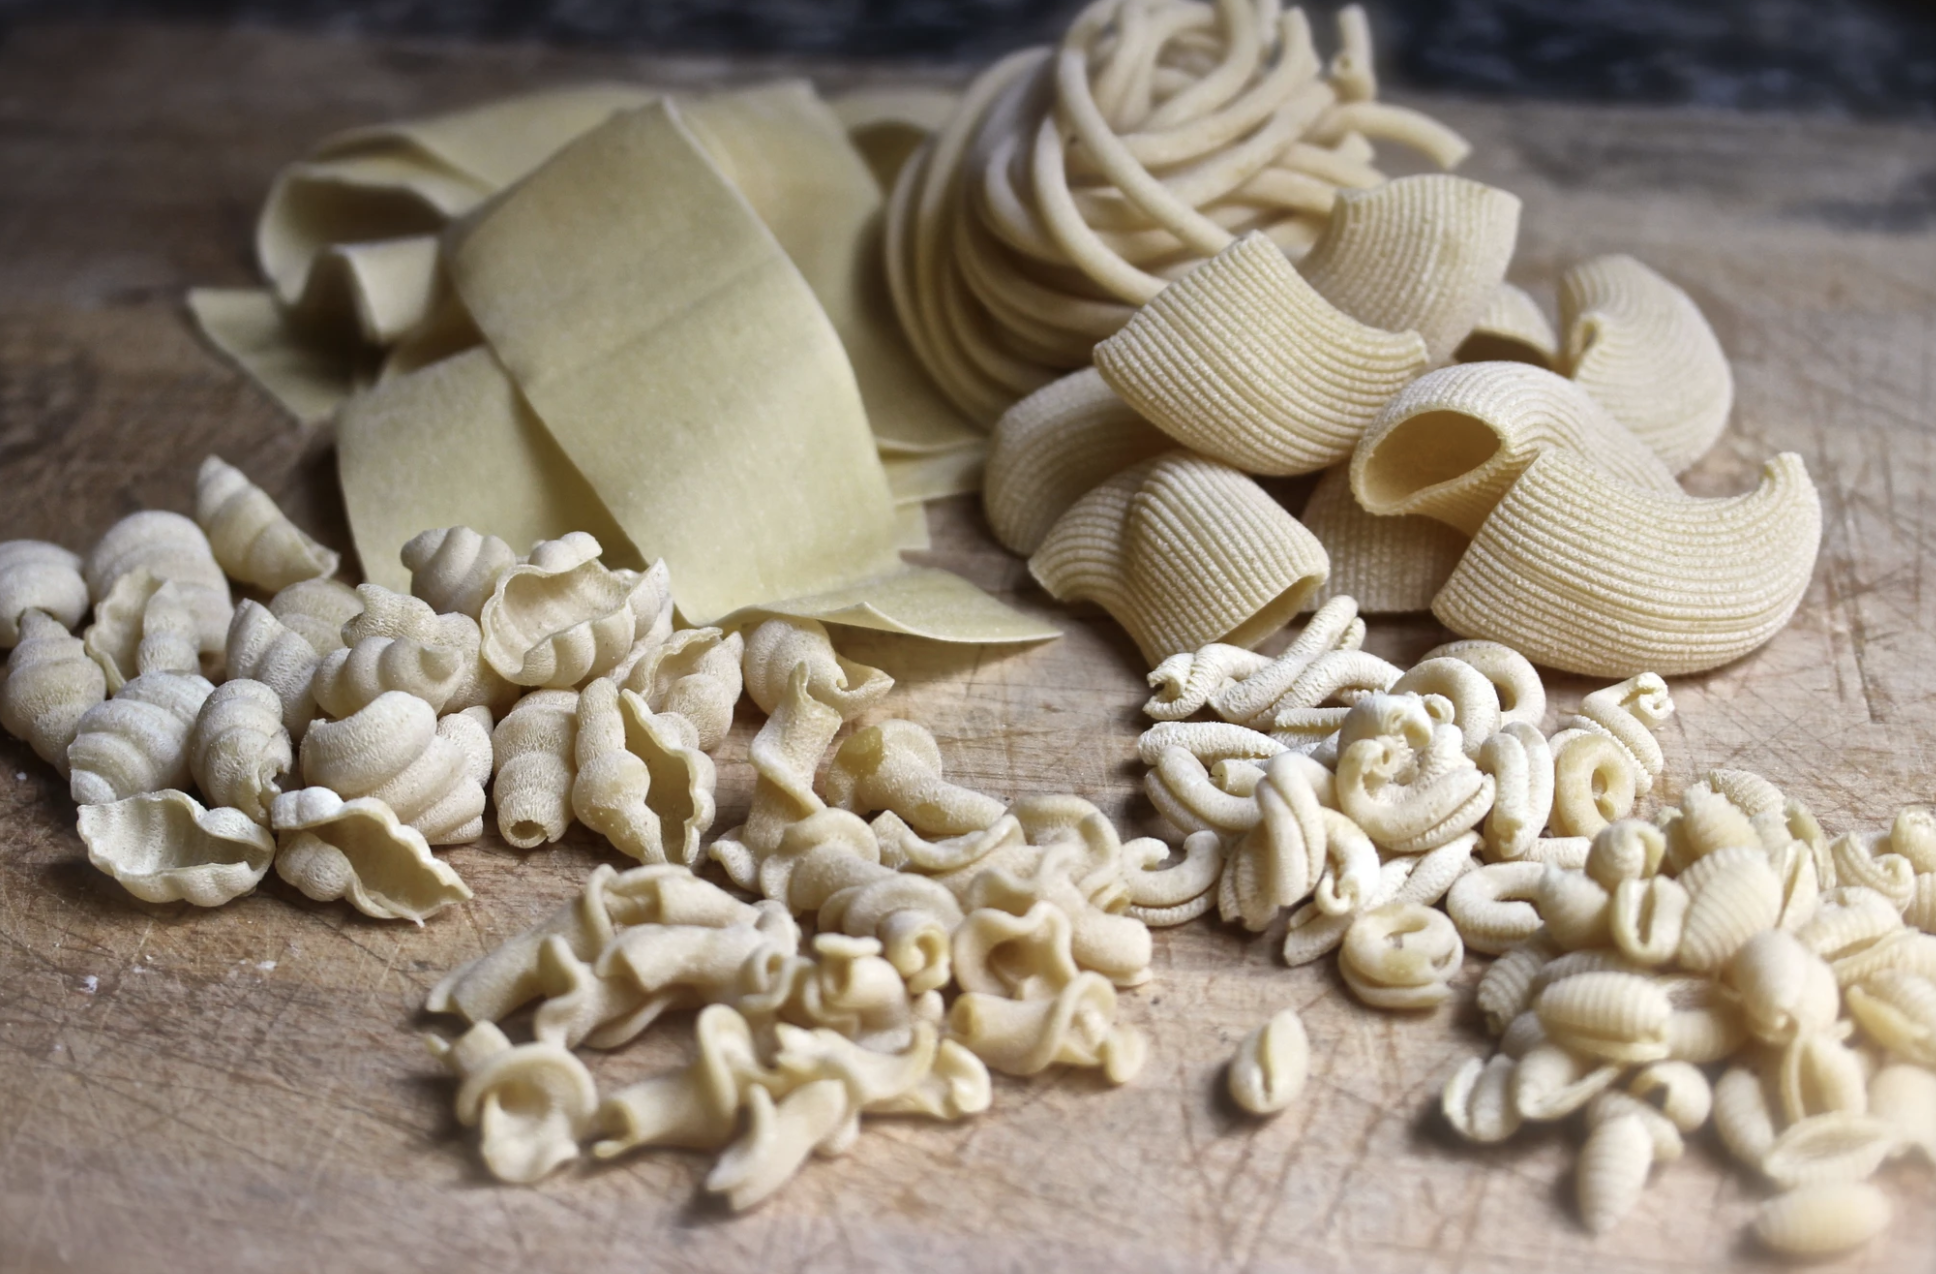 Freshly made pasta from Il Nido on a wooden counter